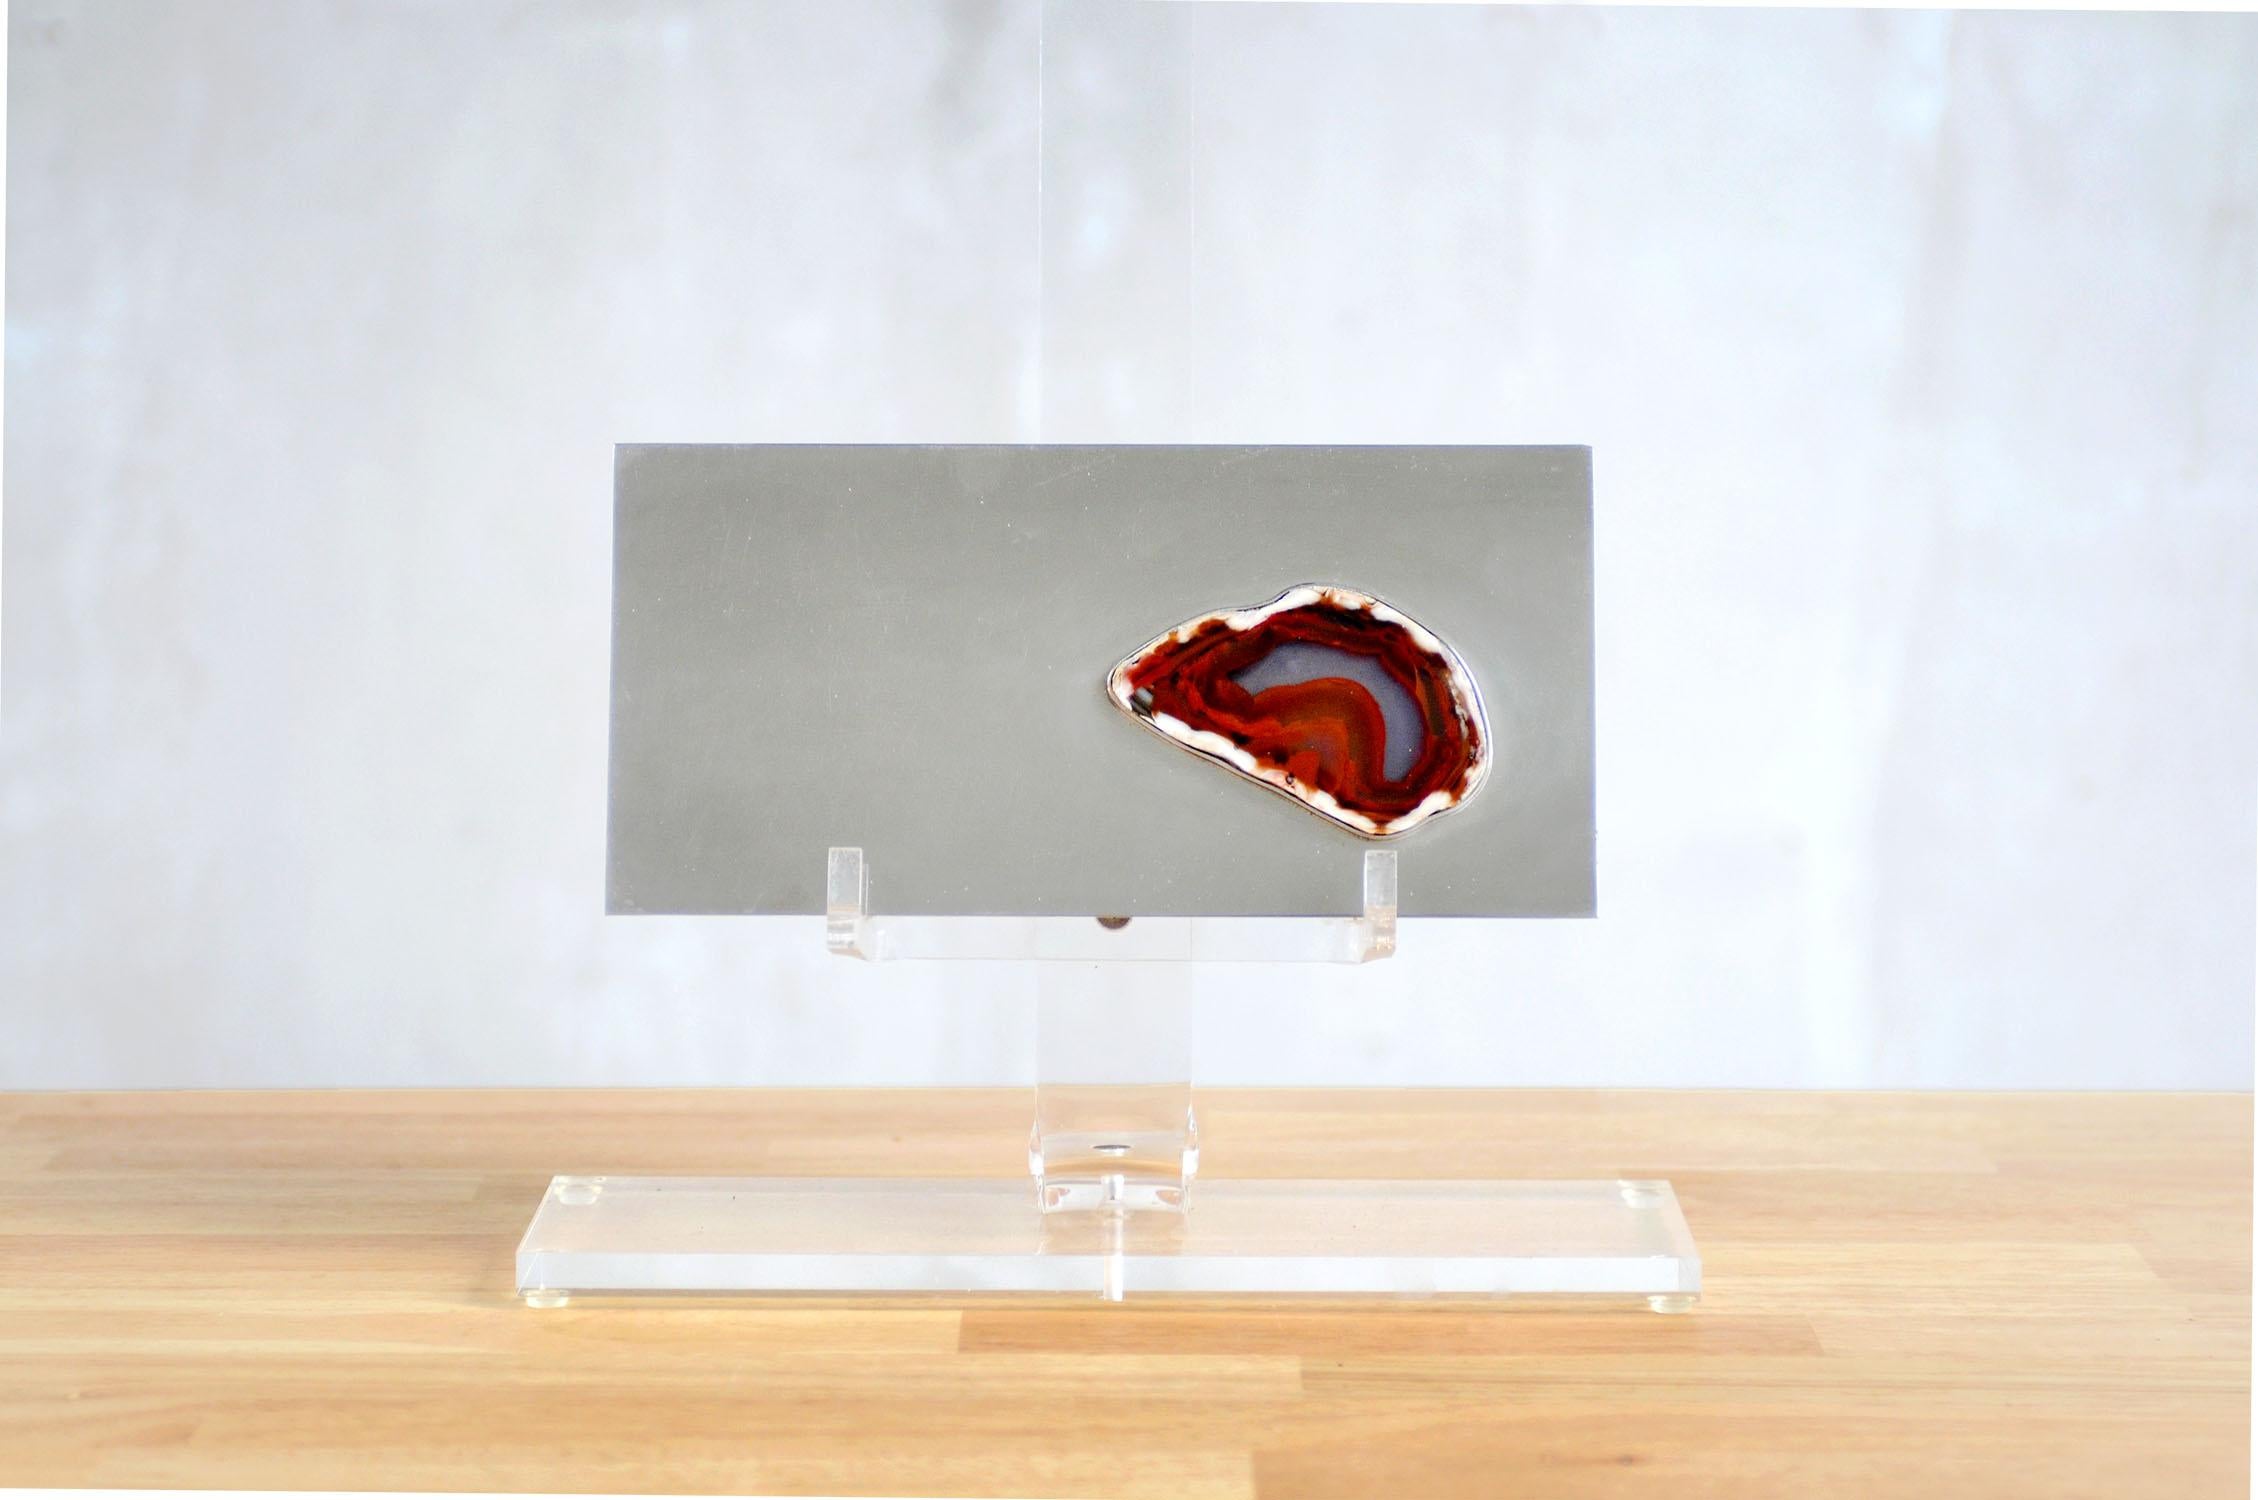 Maria Pergay (1930), Large flat box in silver metal, France 1970. A red-veined Agathe stone is set on the lid, the interior is dressed in exotic wood. Excellence of the realization, beauty of the materials, elegance of the design are united in this